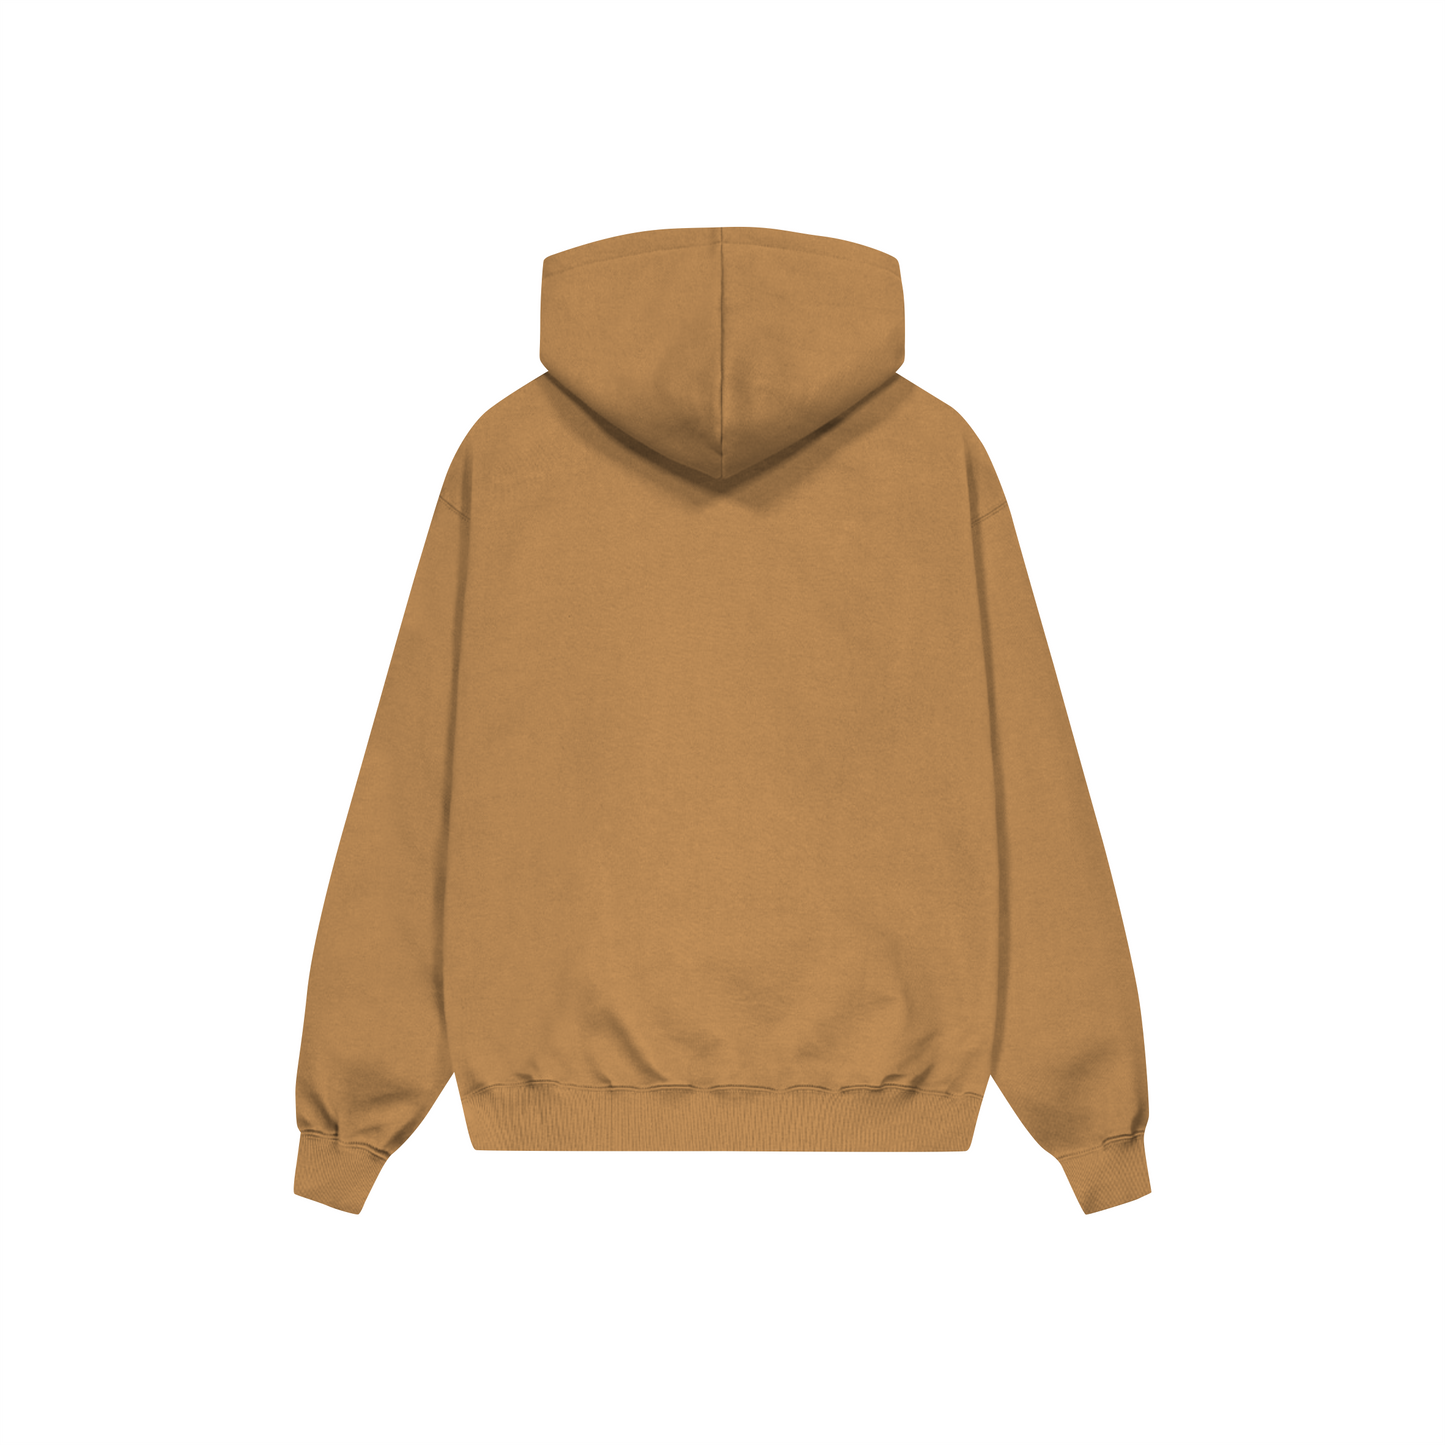 “Sandy Situation” God Knows Hoodie